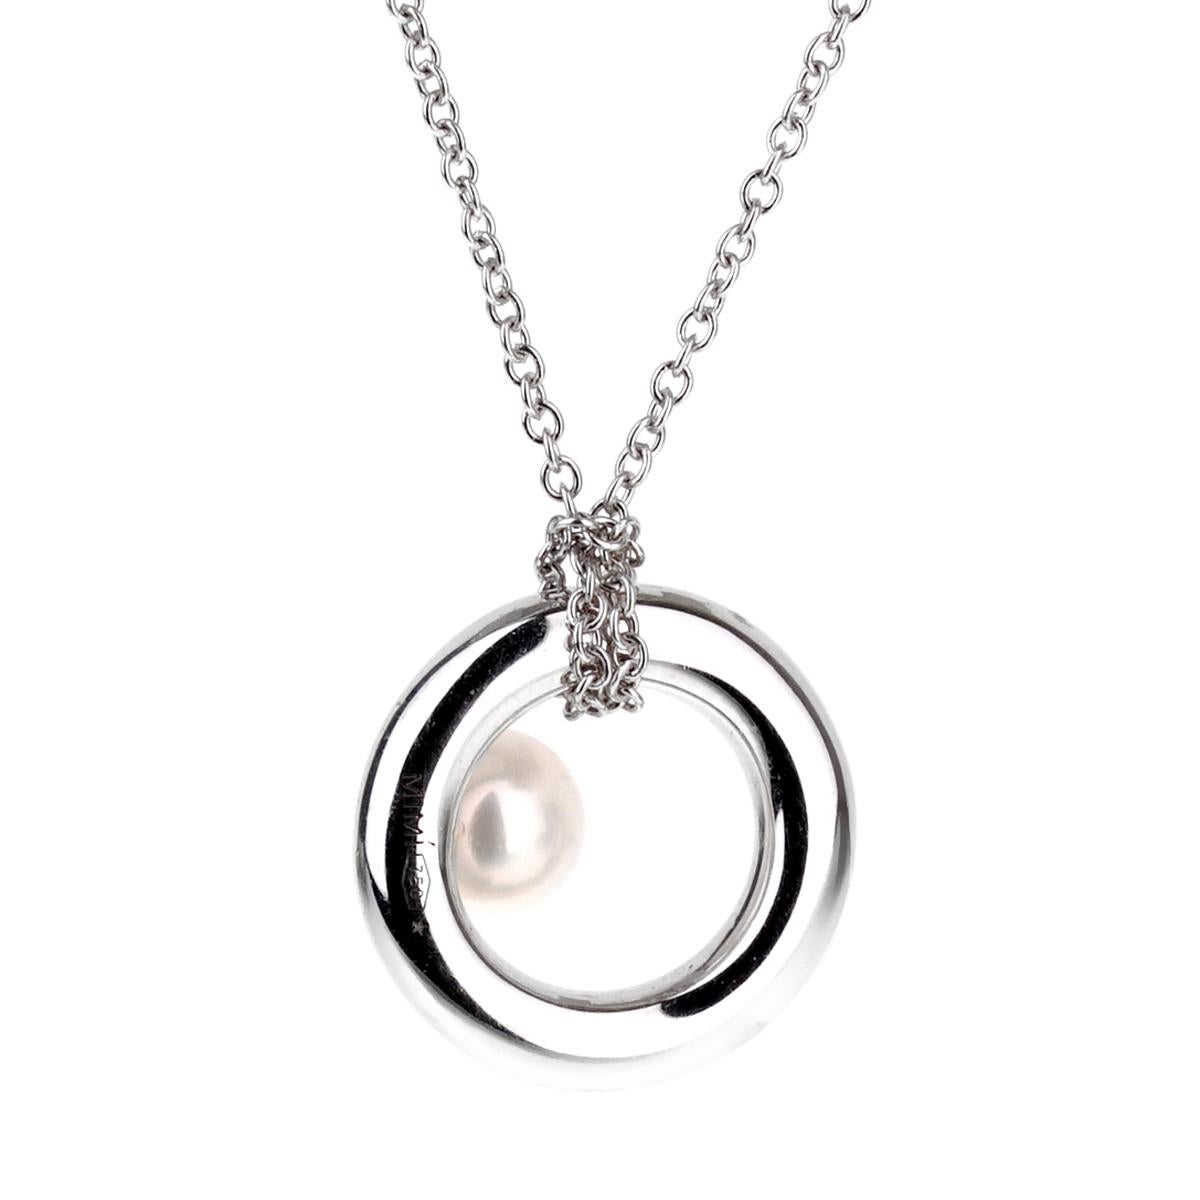 A chic Mimi Milano necklace featuring a 4.5mm cultured freshwater pearl. The pendant is suspended by an 18k white gold 15.5